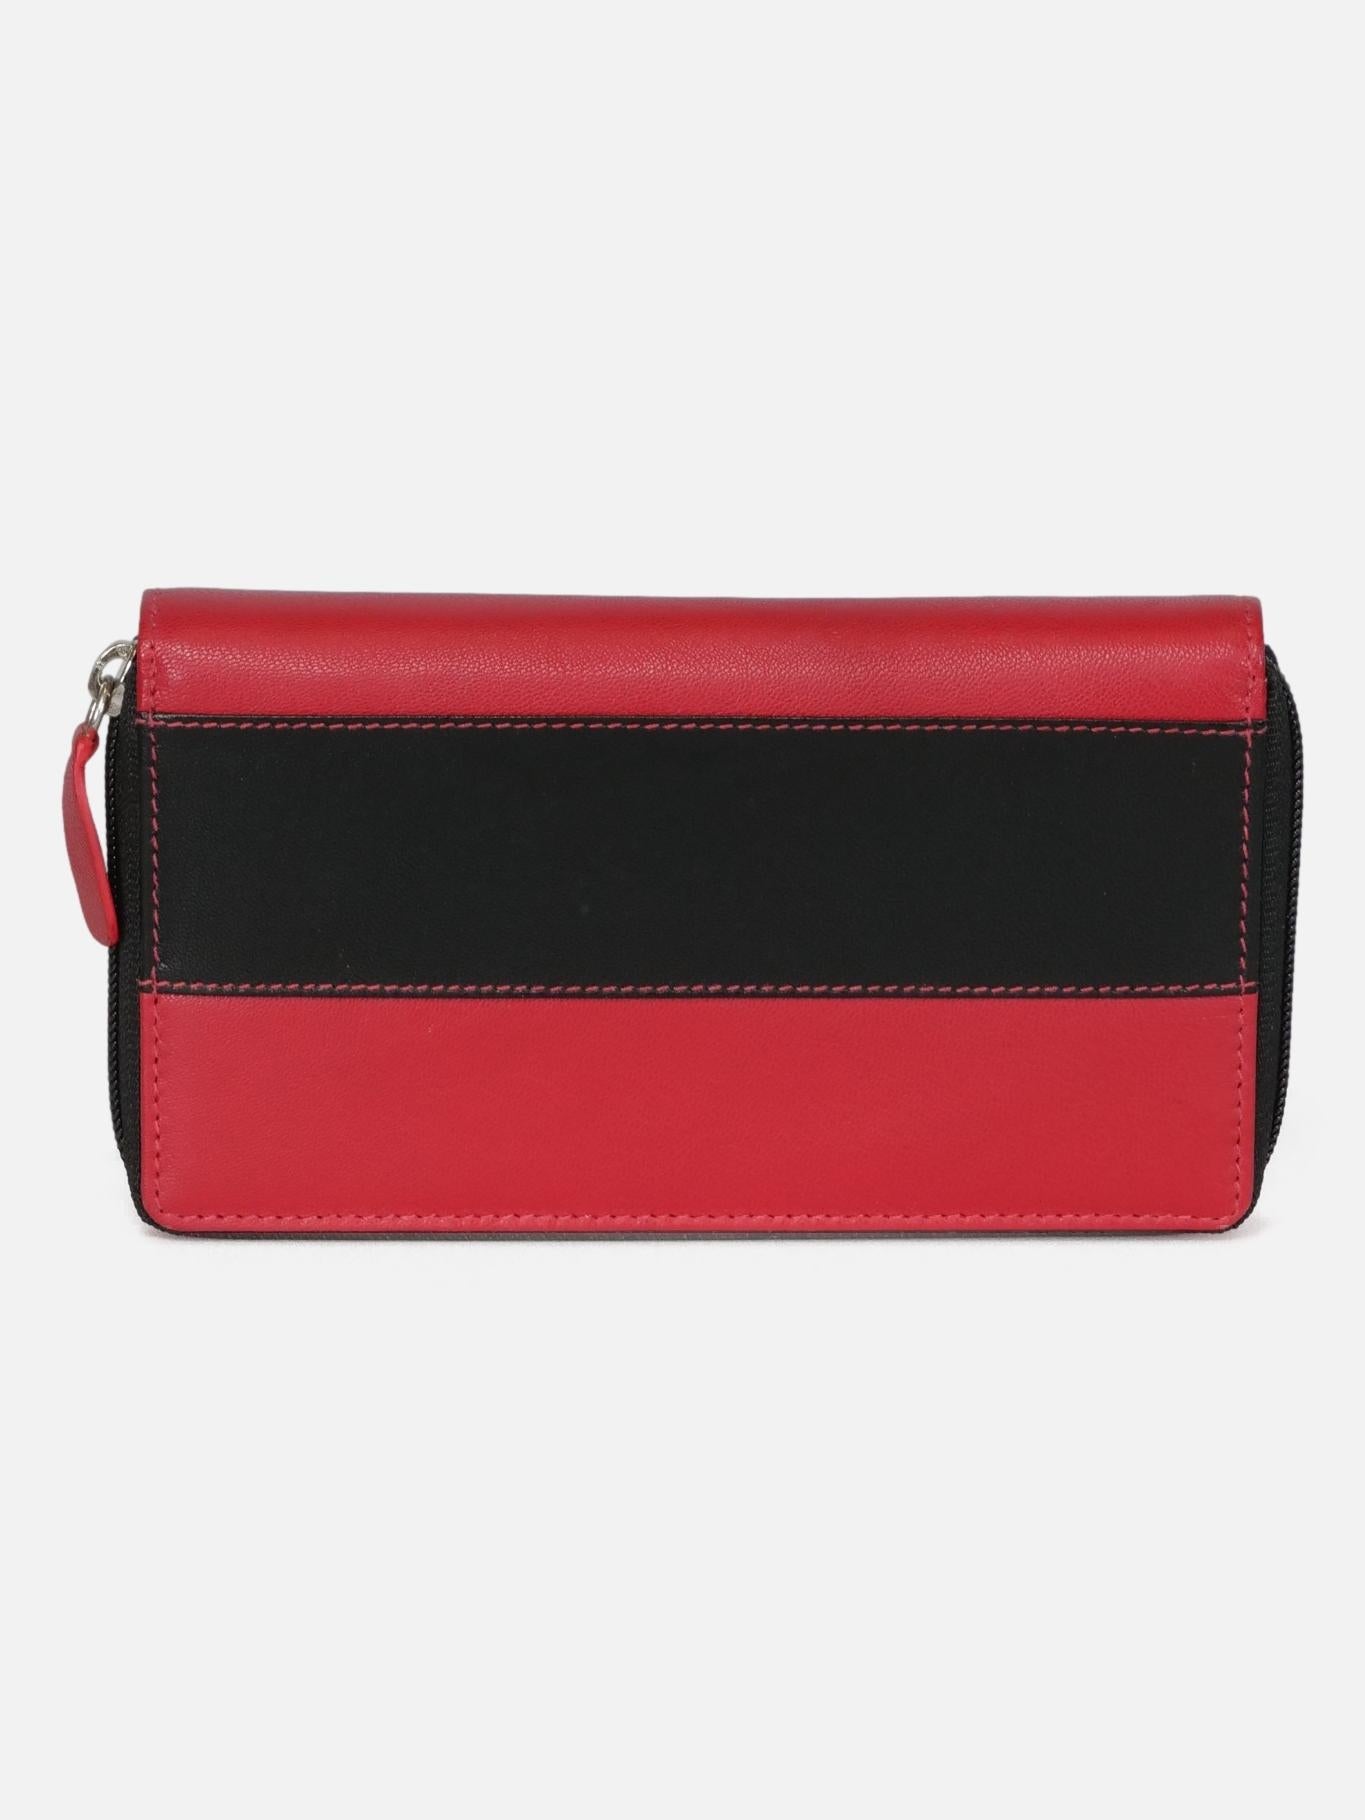 1354 Wallet - Goat Leather - Accesories - Black & Red